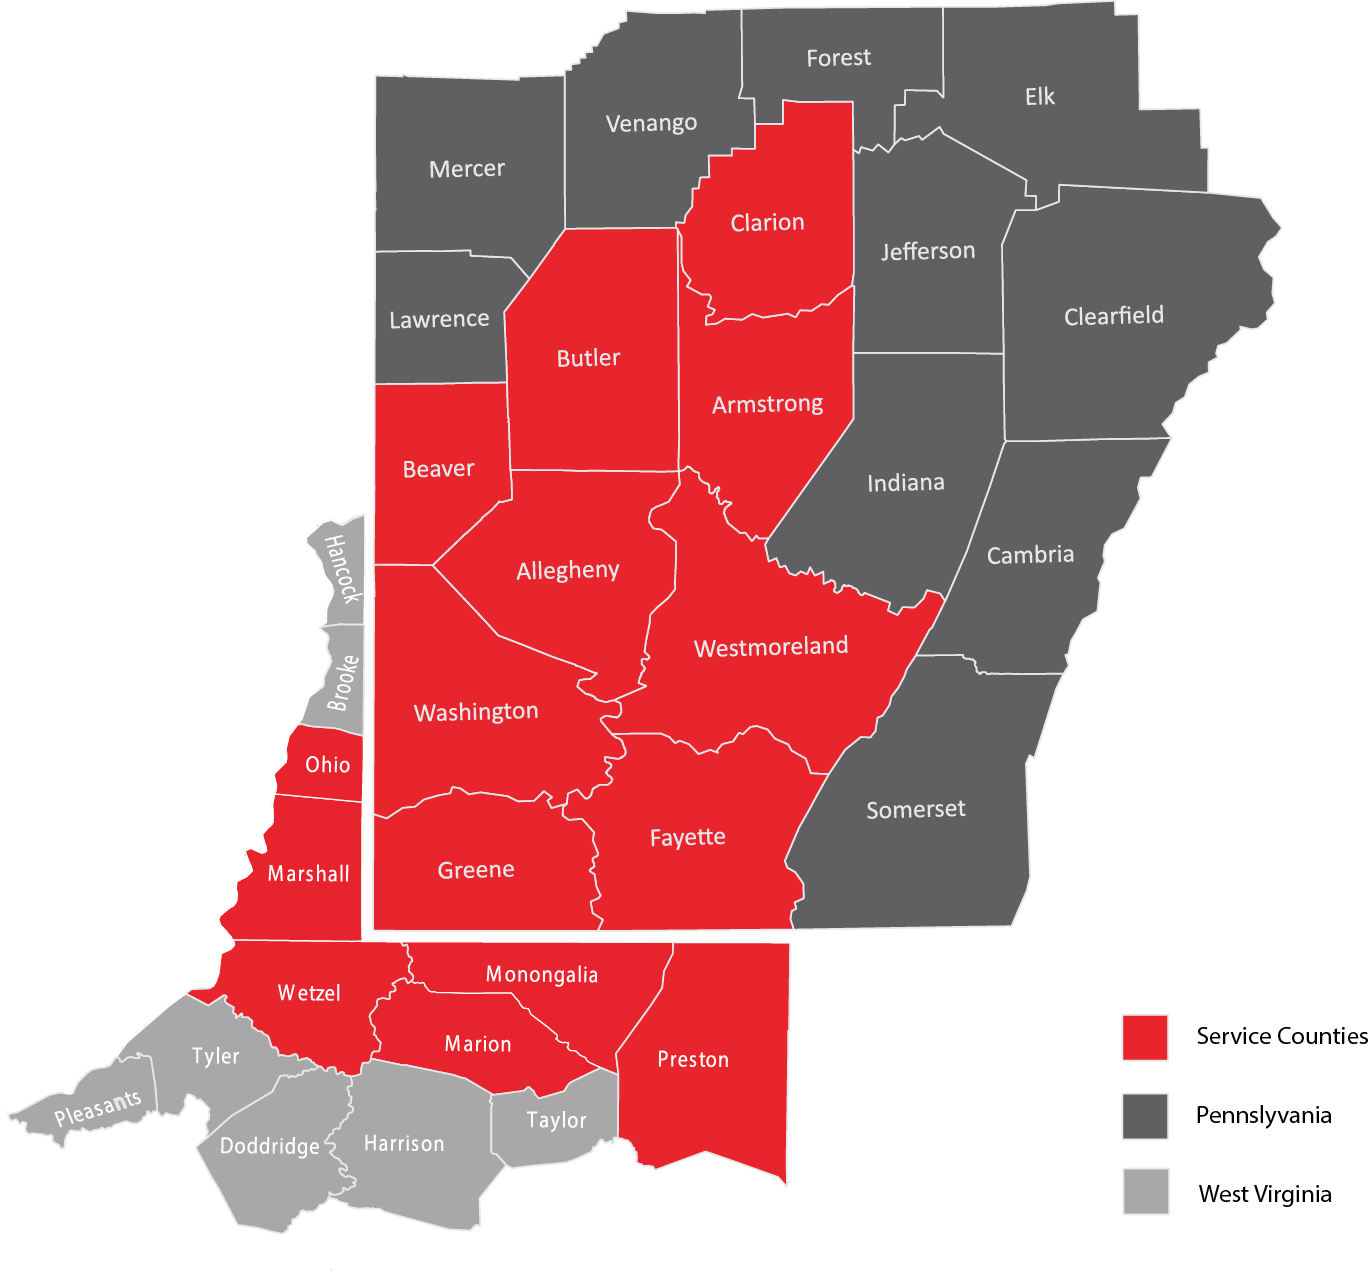 The counties we offer vending services to in Pennsylvania and West Virginia